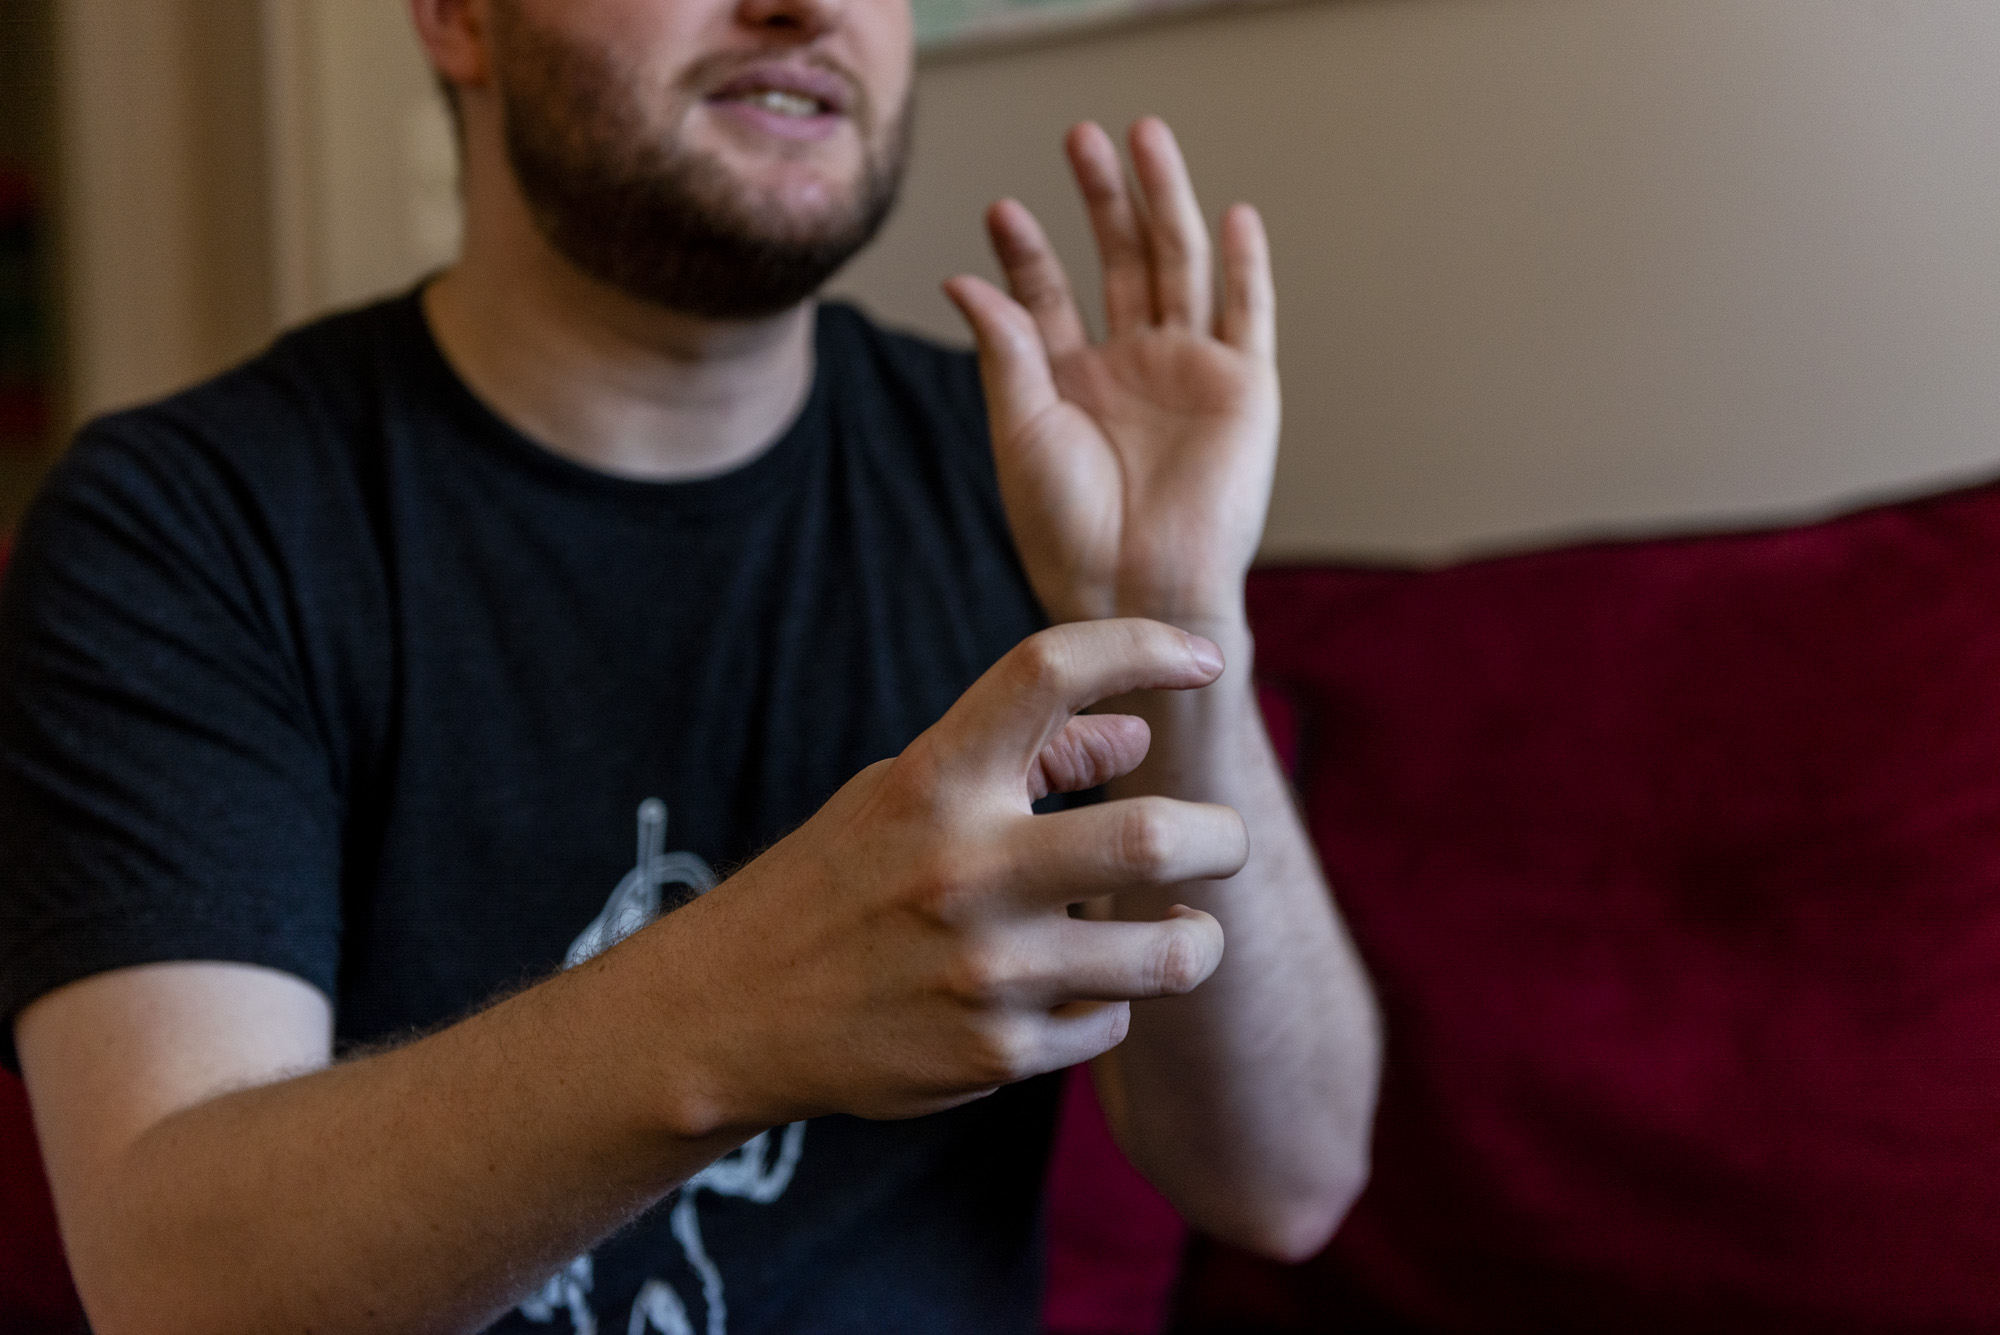 Image: The image is focused on the artists hands. The hand in focus and closest to the viewer is grasping something while the left hand is in motion towards the artists face. Photo by Ryan Edmund Thiel.